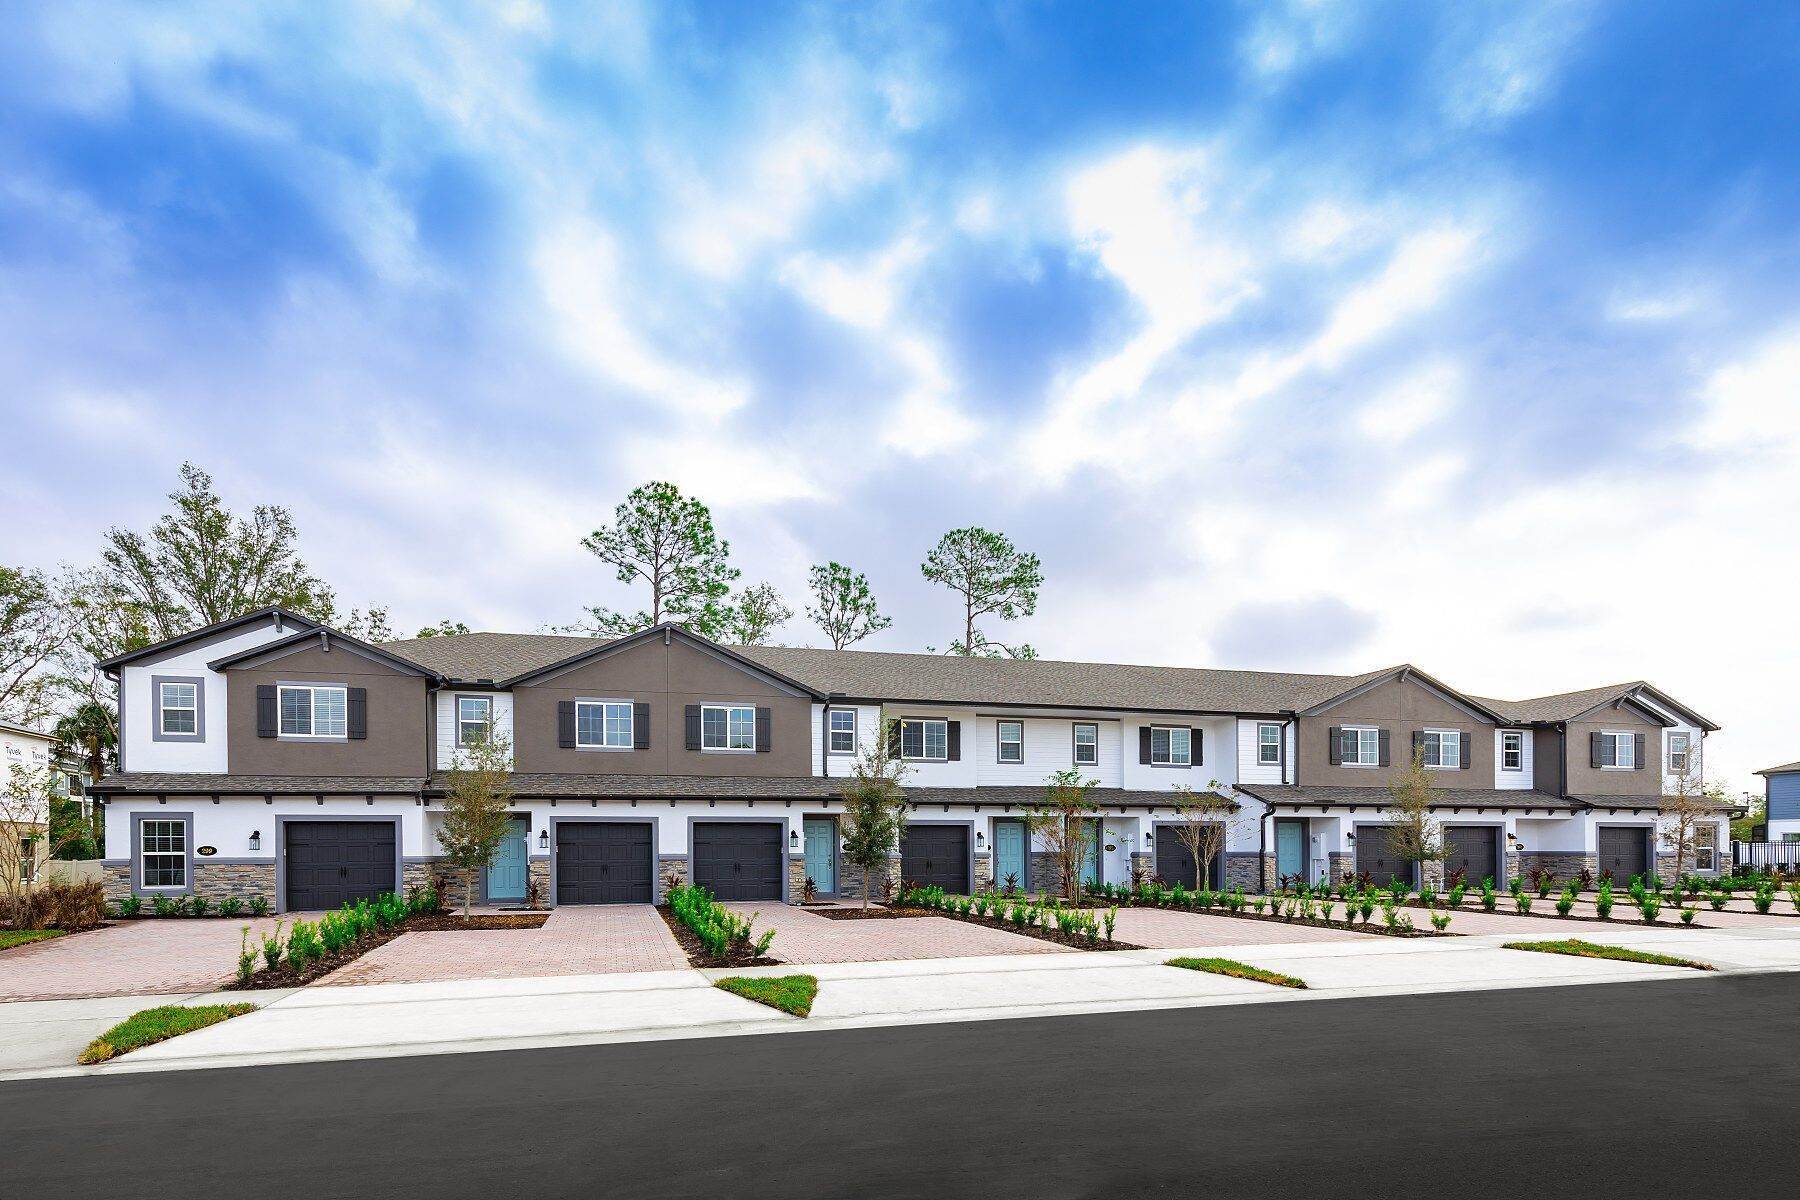 21. Towns at Narcoossee Commons bâtiment à 5601 Leon Tyson Road, St. Cloud, FL 34771